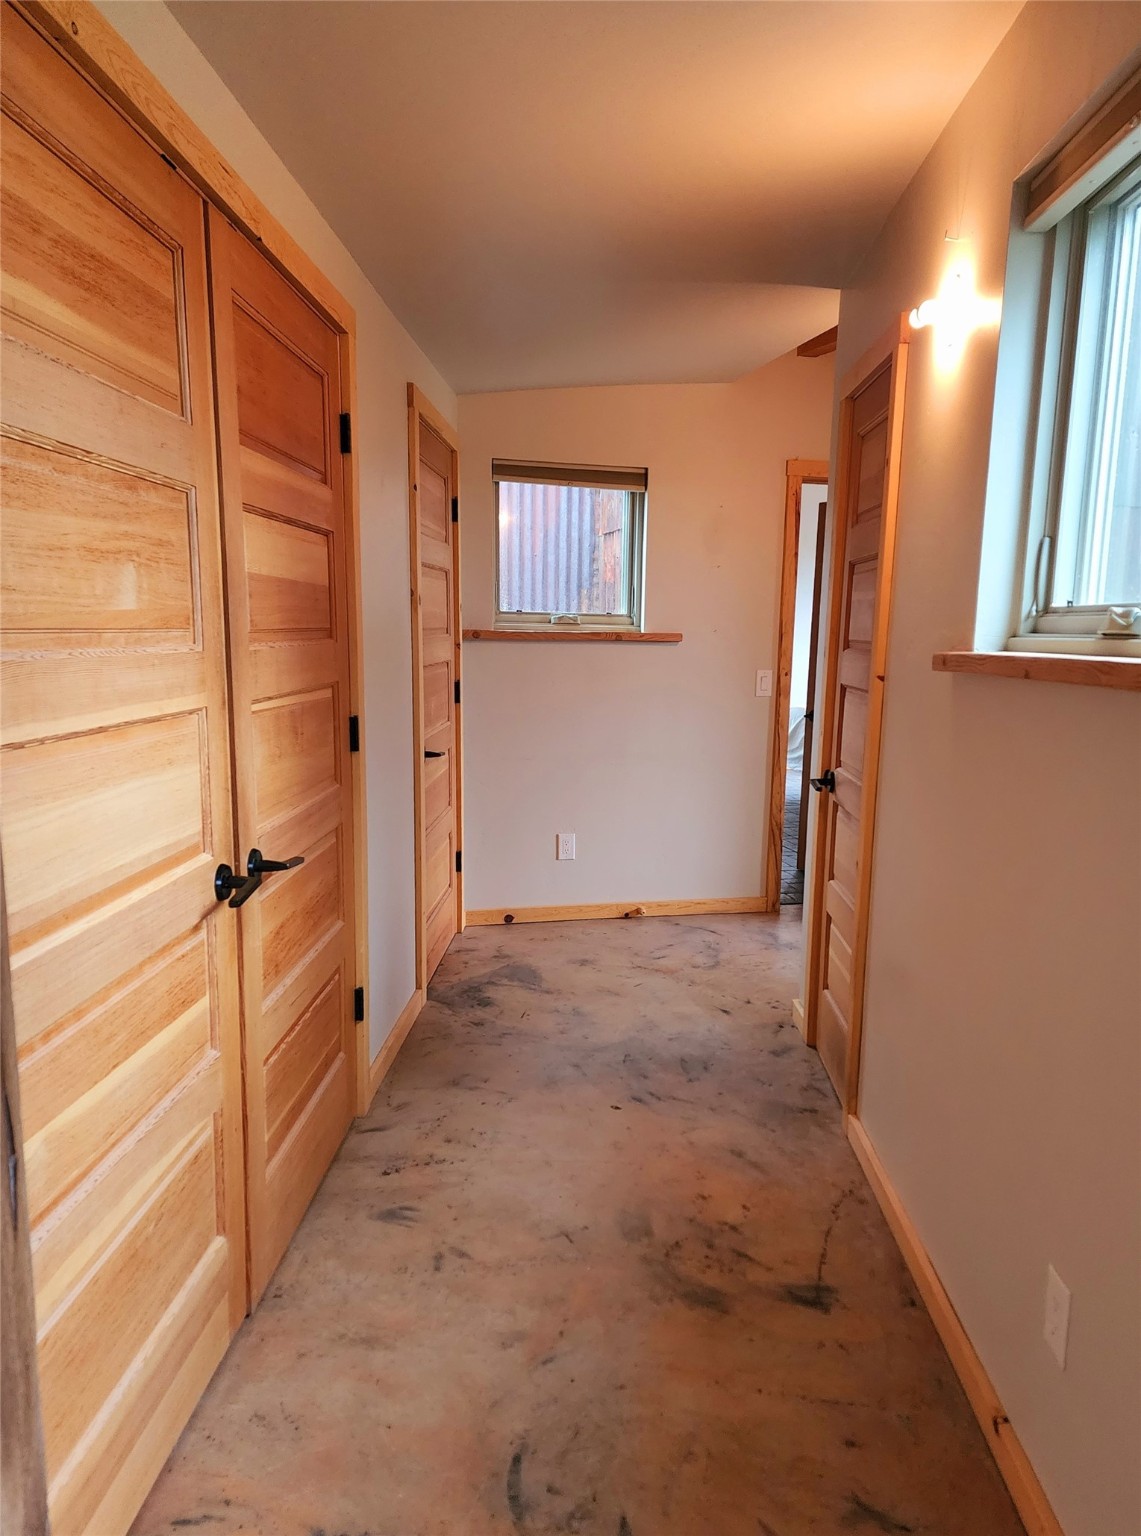 71 Private Drive 1685, El Rito, New Mexico 87530, 1 Bedroom Bedrooms, ,1 BathroomBathrooms,Residential,For Sale,71 Private Drive 1685,202232532